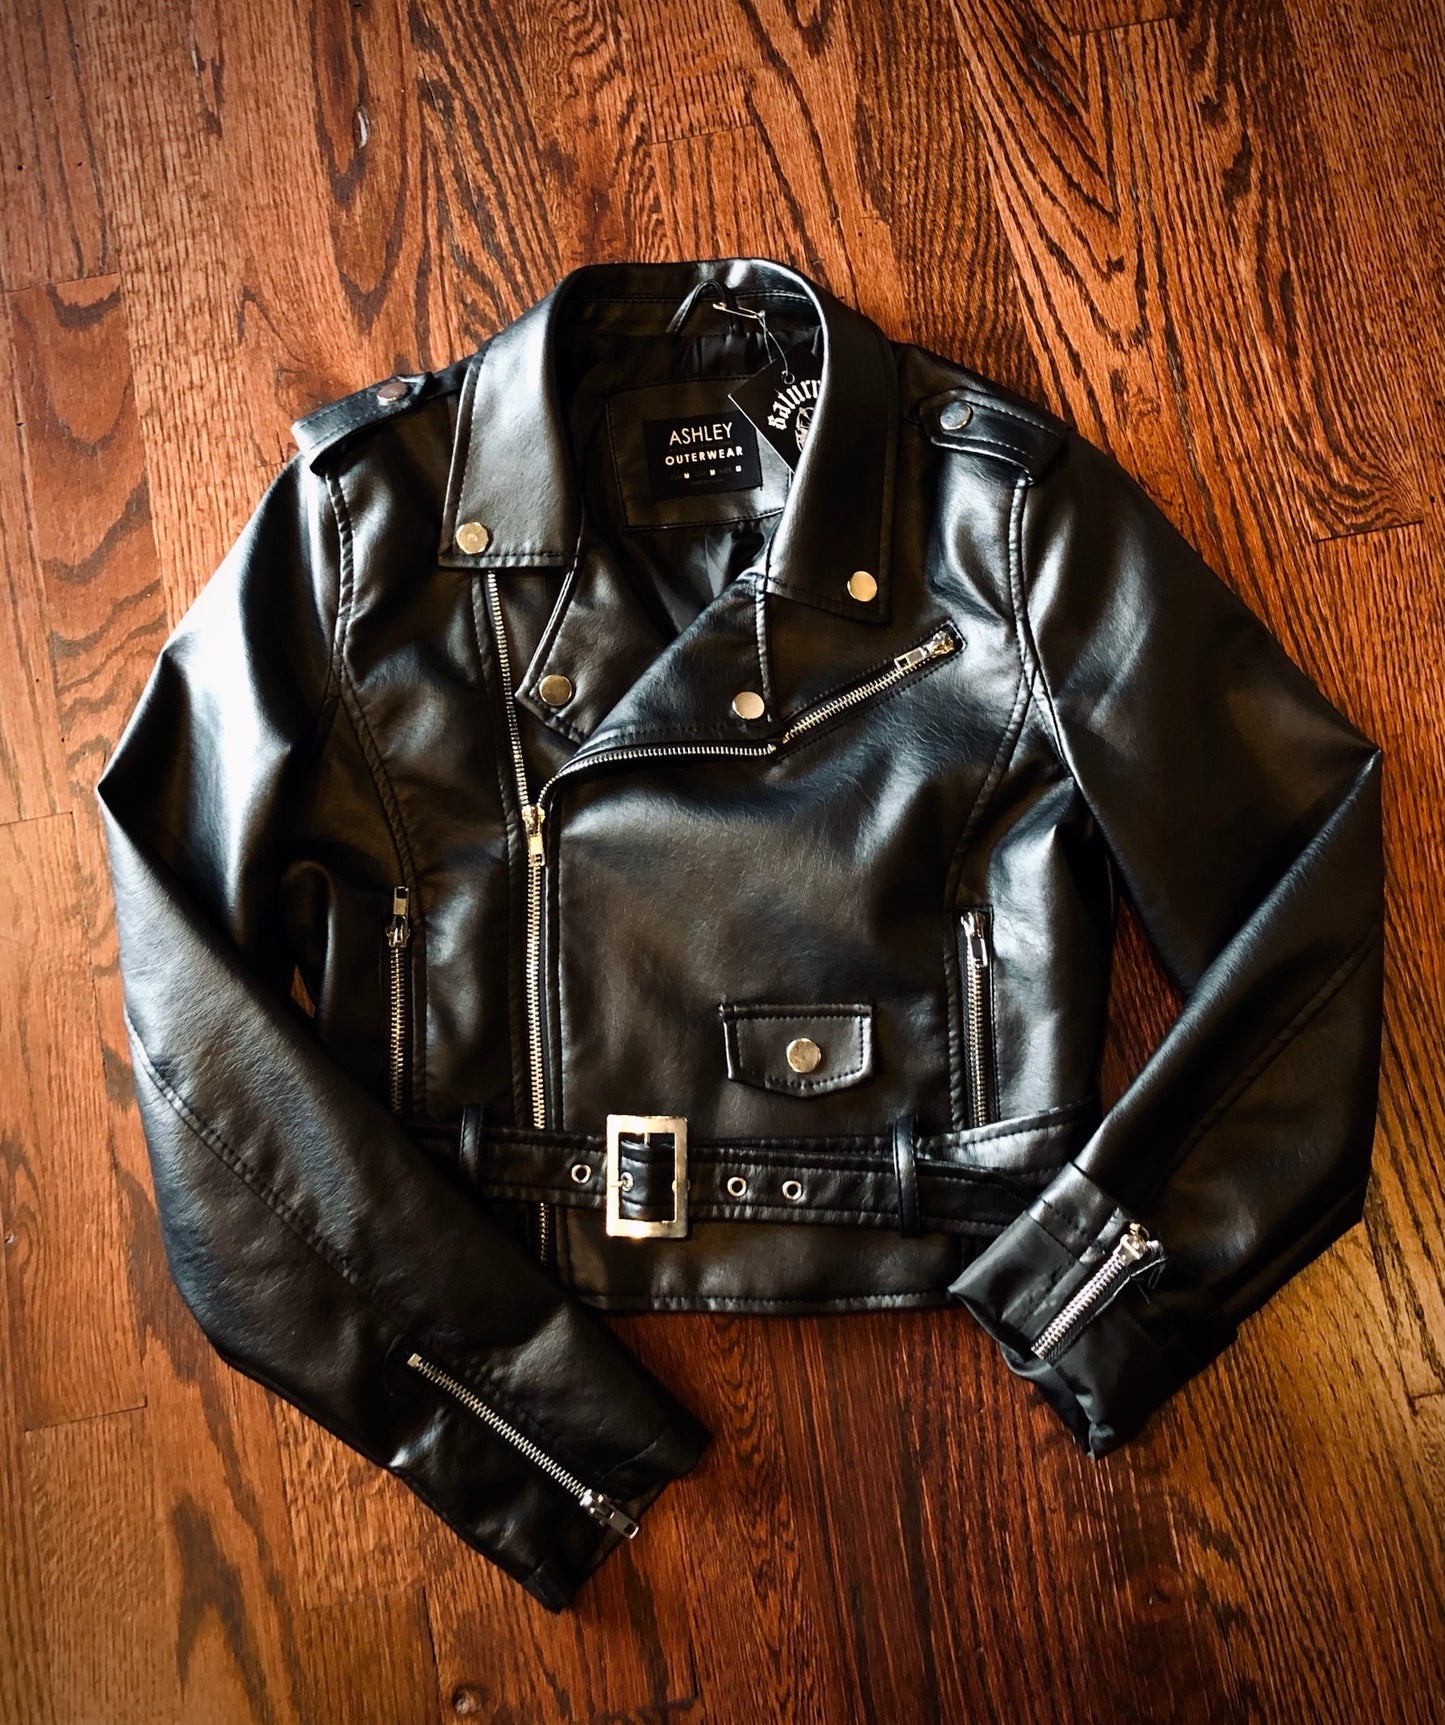 Ashley Outerwear Faux Leather Motorcycle Jacket Size M